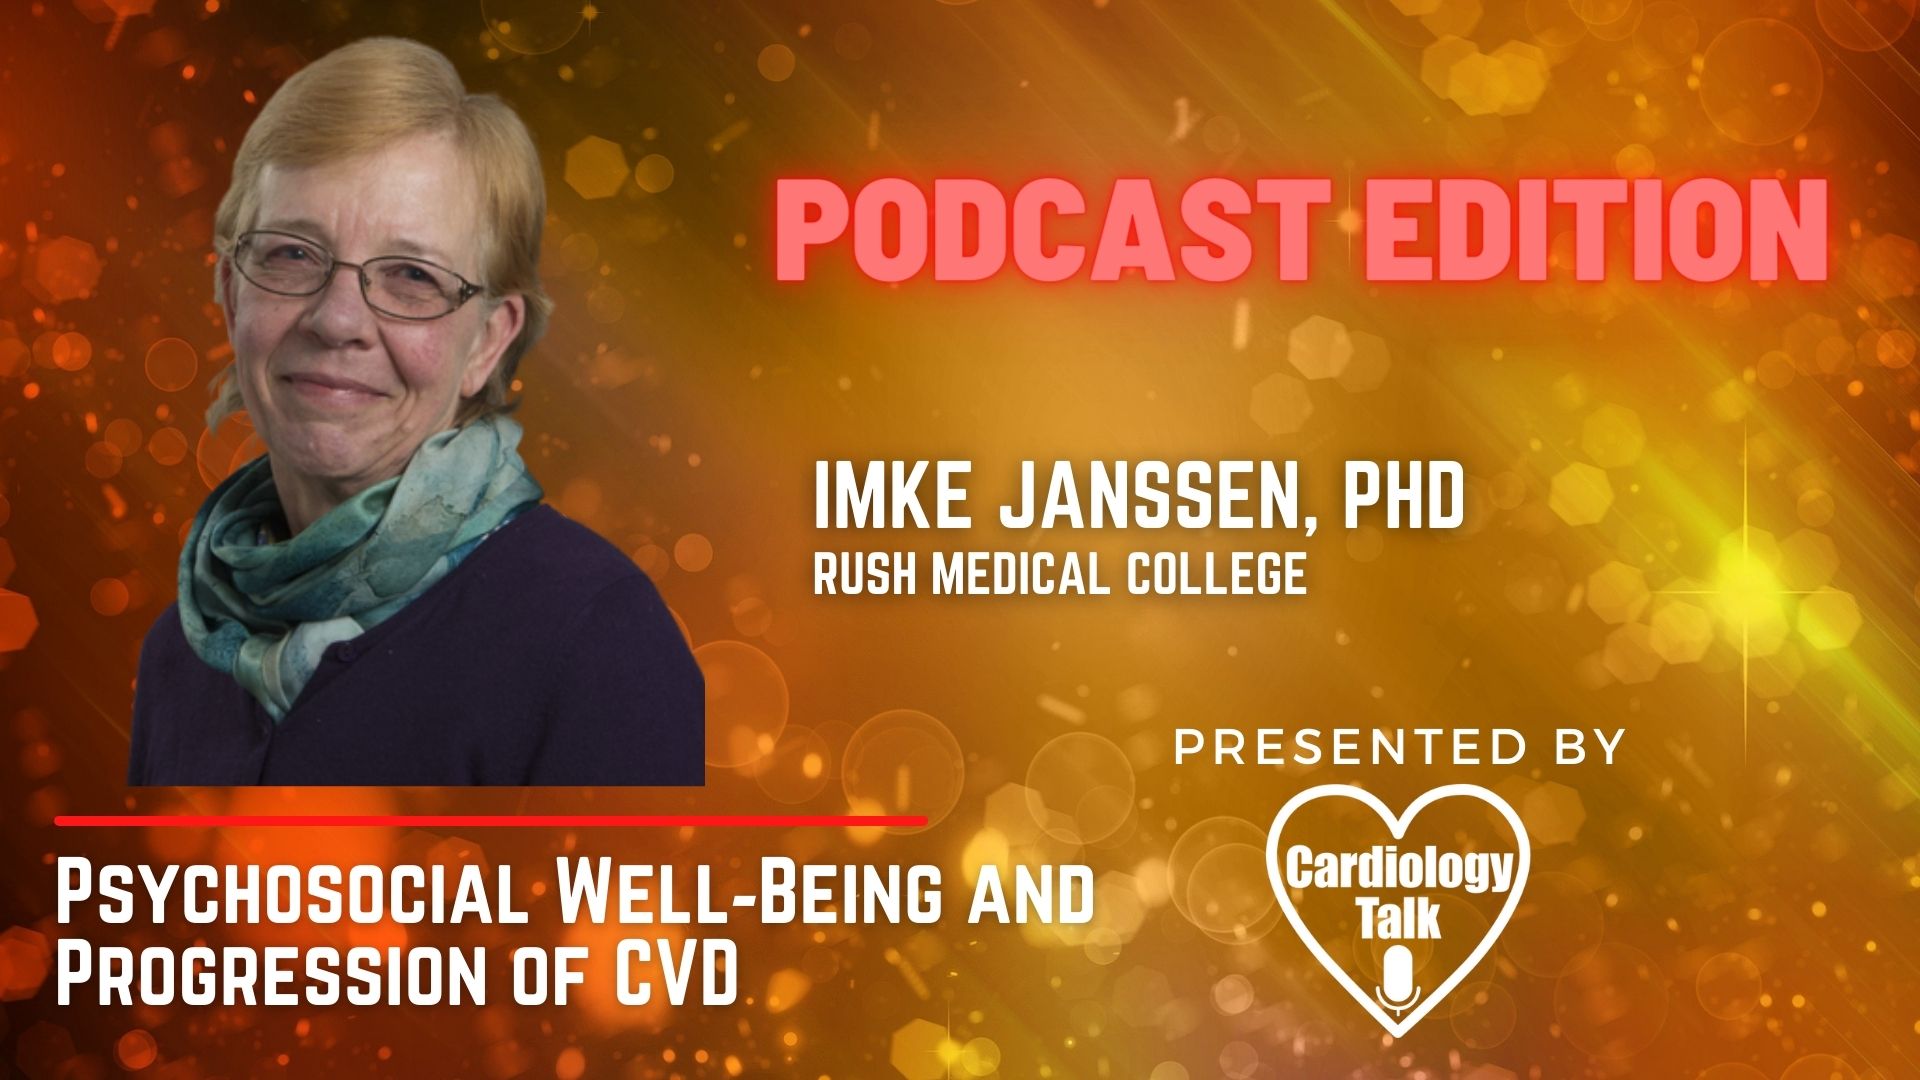 Podcast Imke Janssen, PhD @RushUniversity #CVD Psychosocial Well‐Being and Progression of CVD